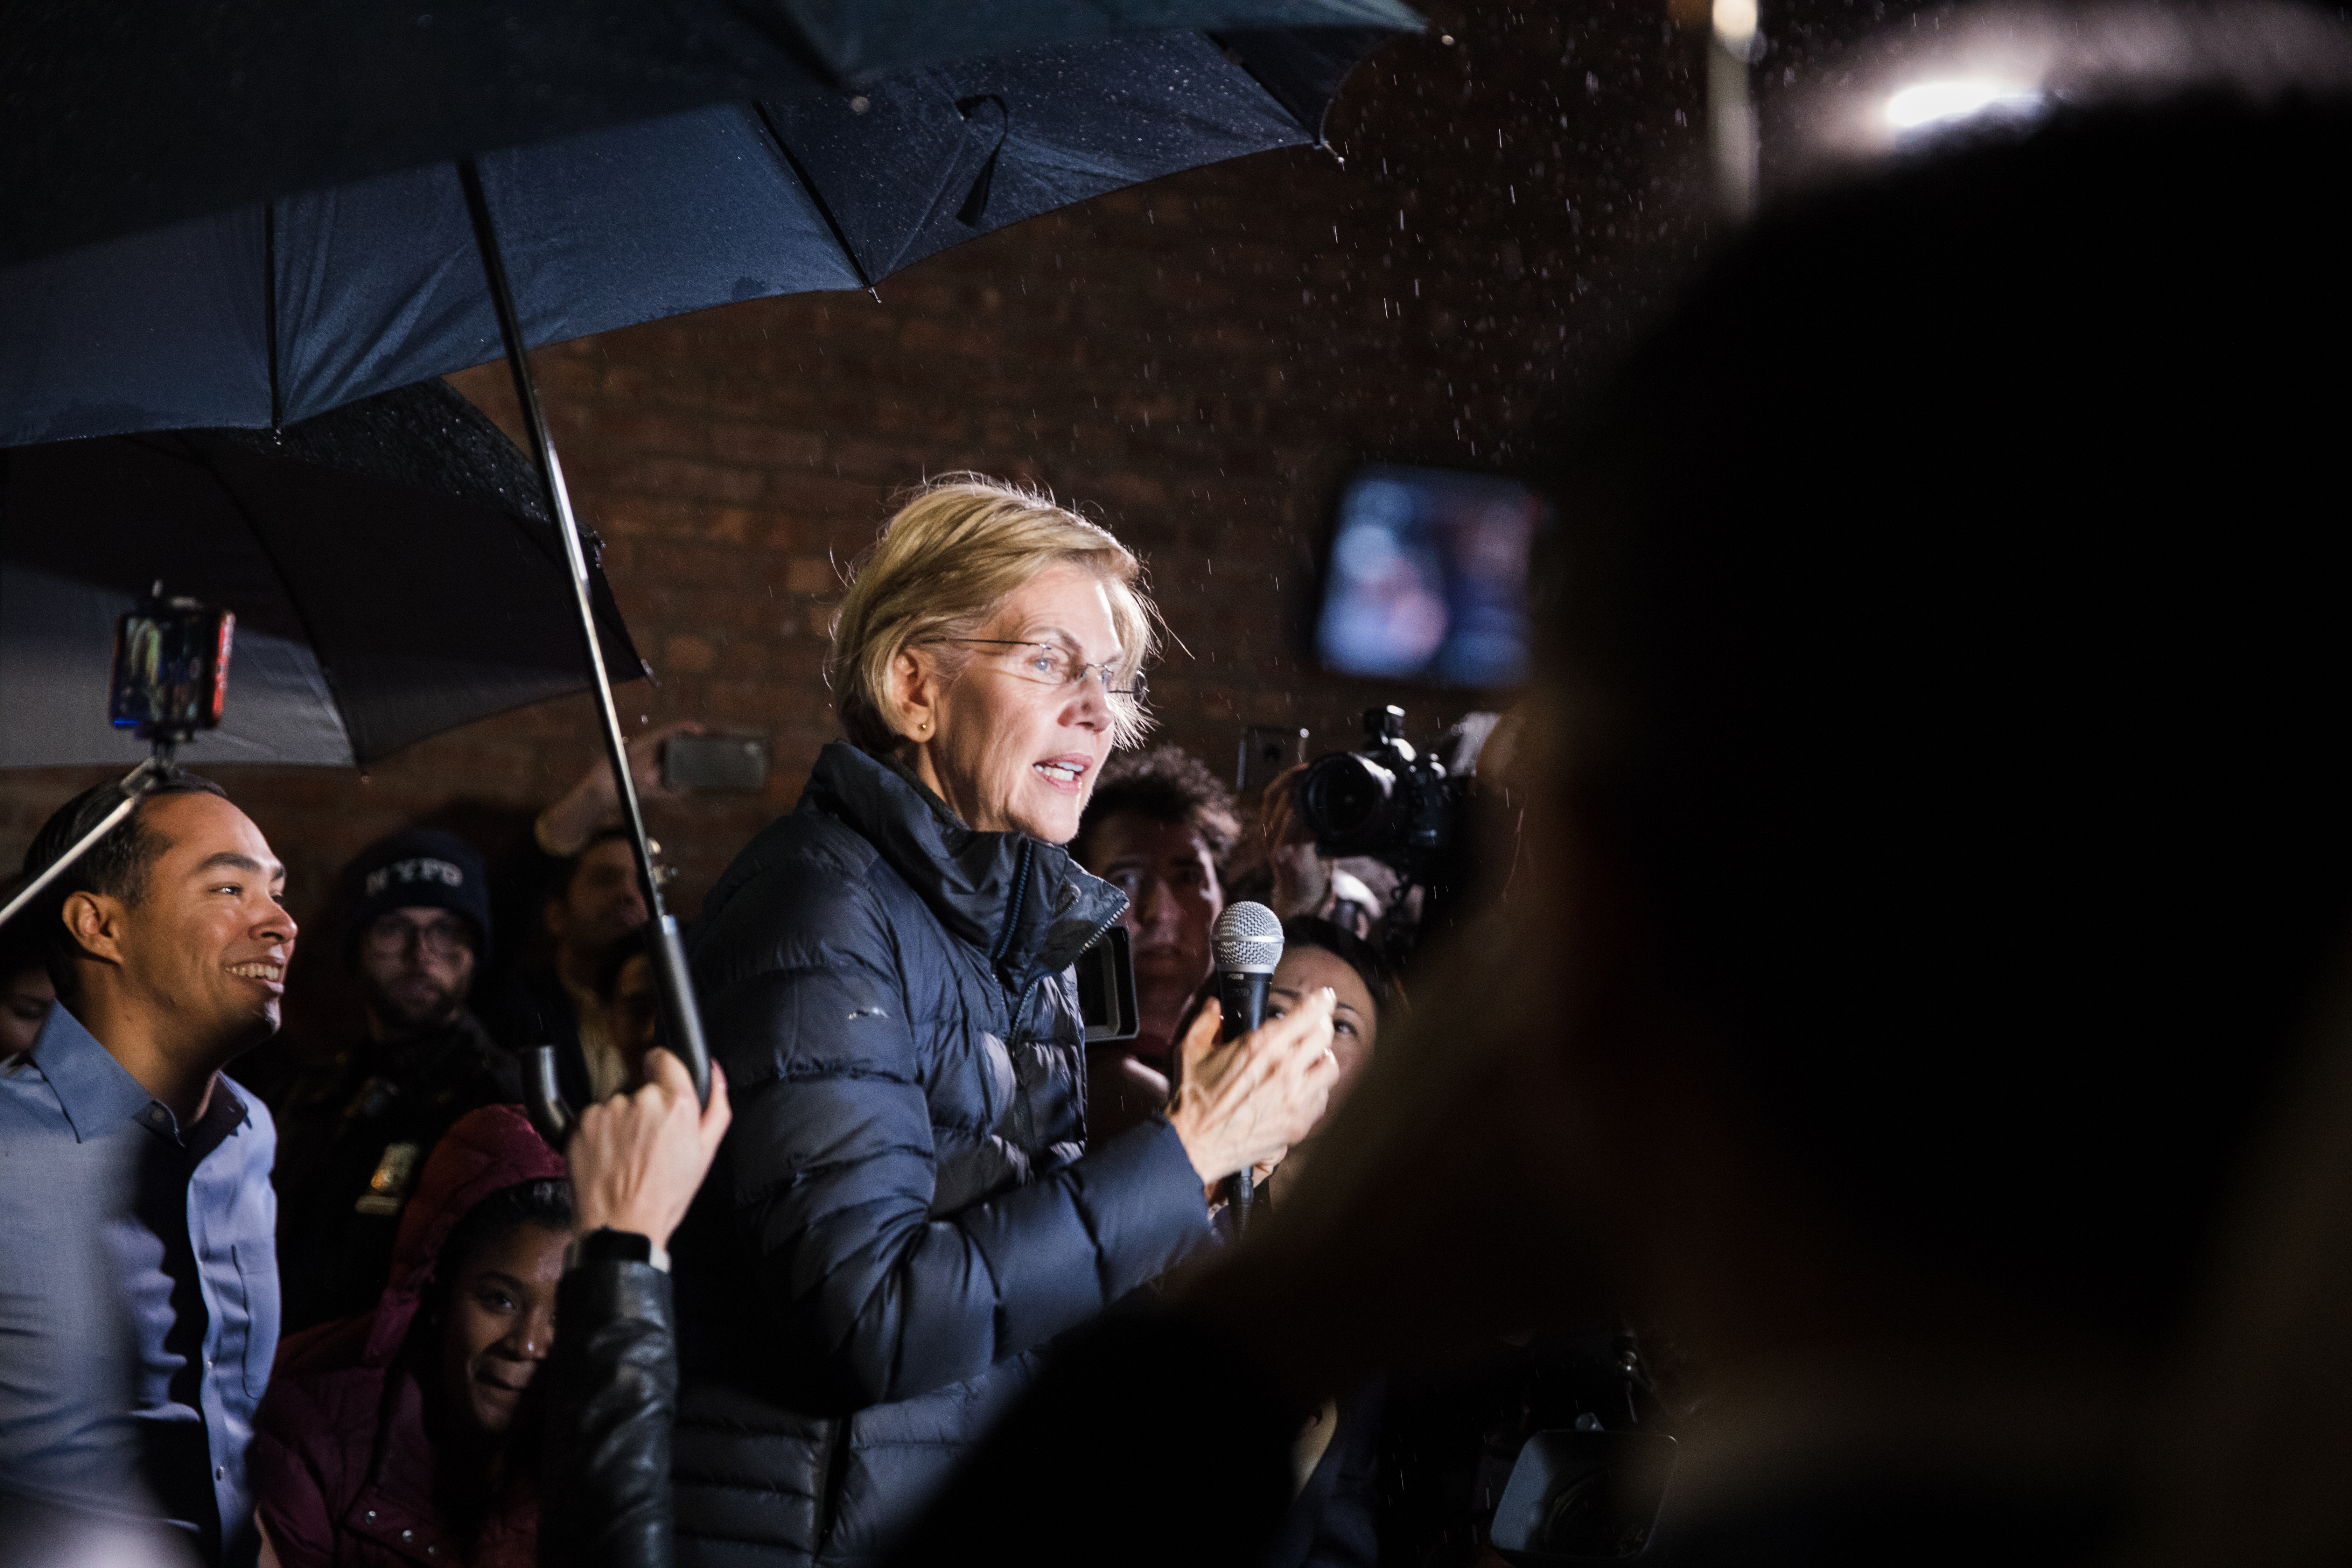 Before entering the theater, Warren gave an impromptu speech to an overflow crowd in the rain.